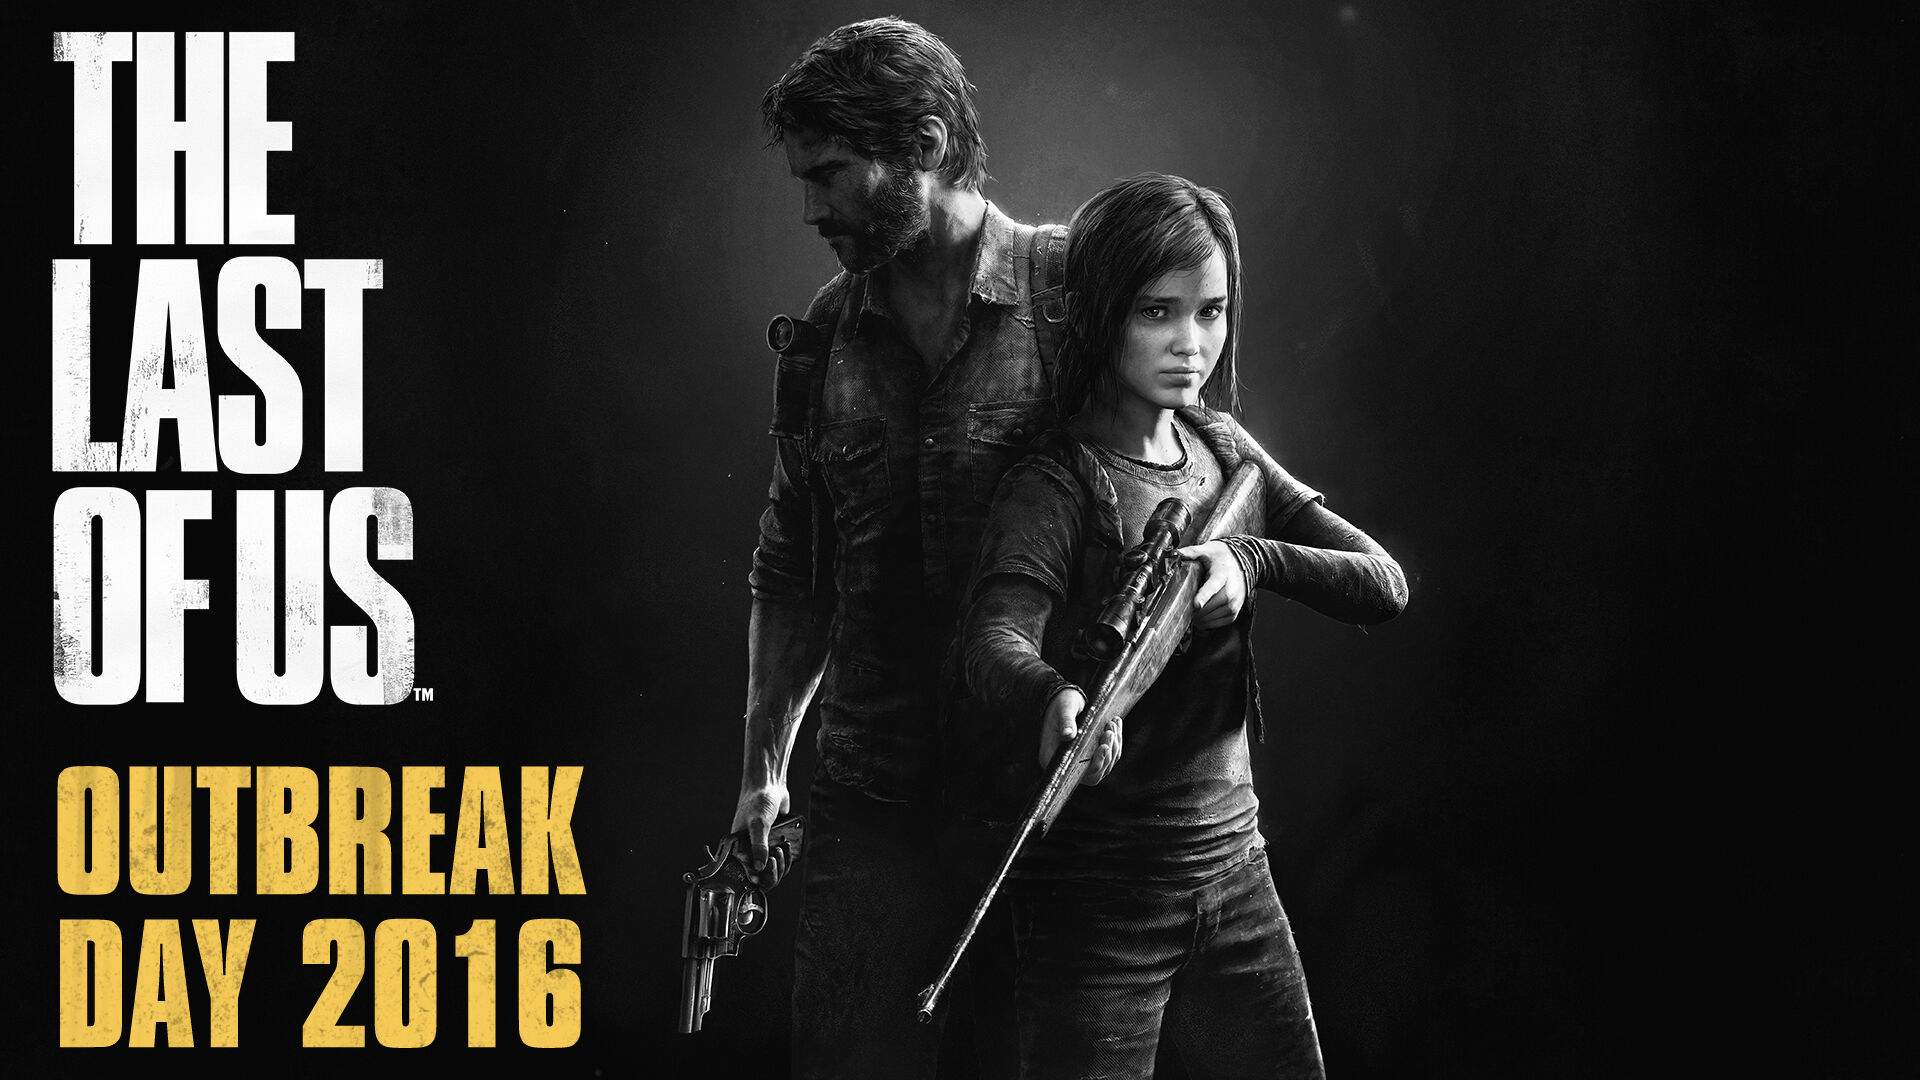 The Last of Us 2: OUTBREAK DAY 2020 UPDATE - NEW ANNOUNCEMENTS +